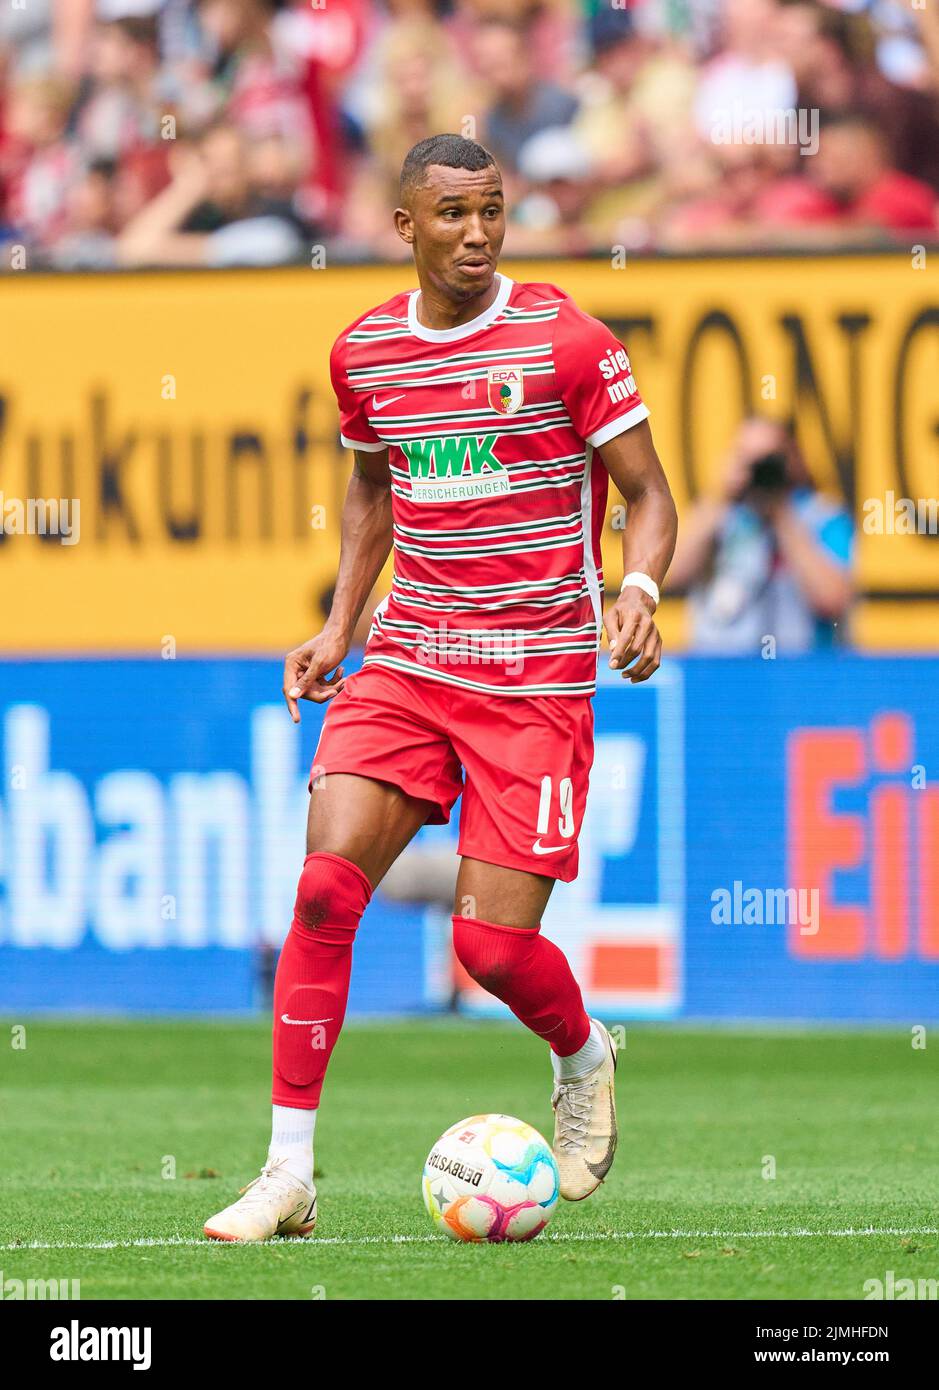 Felix UDUOKHAI, FCA 19  in the match FC AUGSBURG - SC FREIBURG 0-4 1.German Football League on Aug 06, 2022 in Augsburg, Germany. Season 2022/2023, matchday 1, 1.Bundesliga, FCB, Munich, 1.Spieltag © Peter Schatz / Alamy Live News    - DFL REGULATIONS PROHIBIT ANY USE OF PHOTOGRAPHS as IMAGE SEQUENCES and/or QUASI-VIDEO - Stock Photo